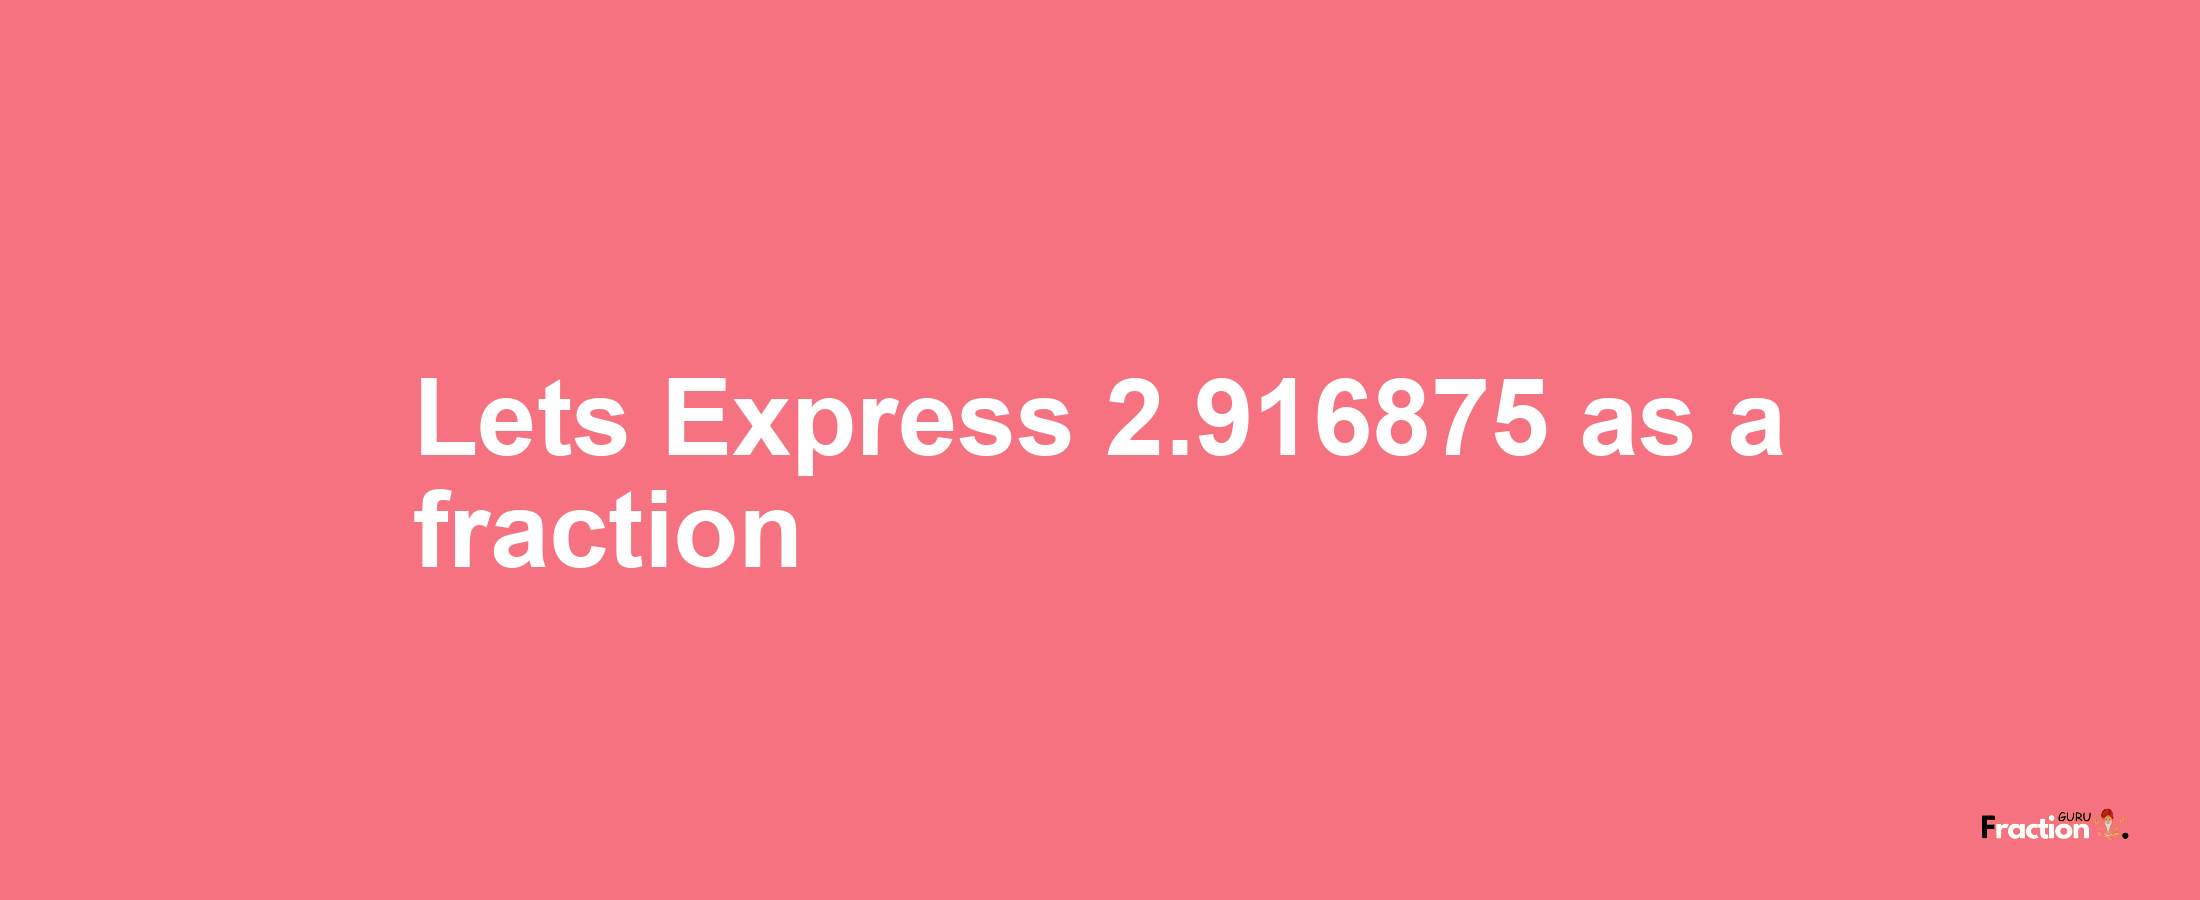 Lets Express 2.916875 as afraction